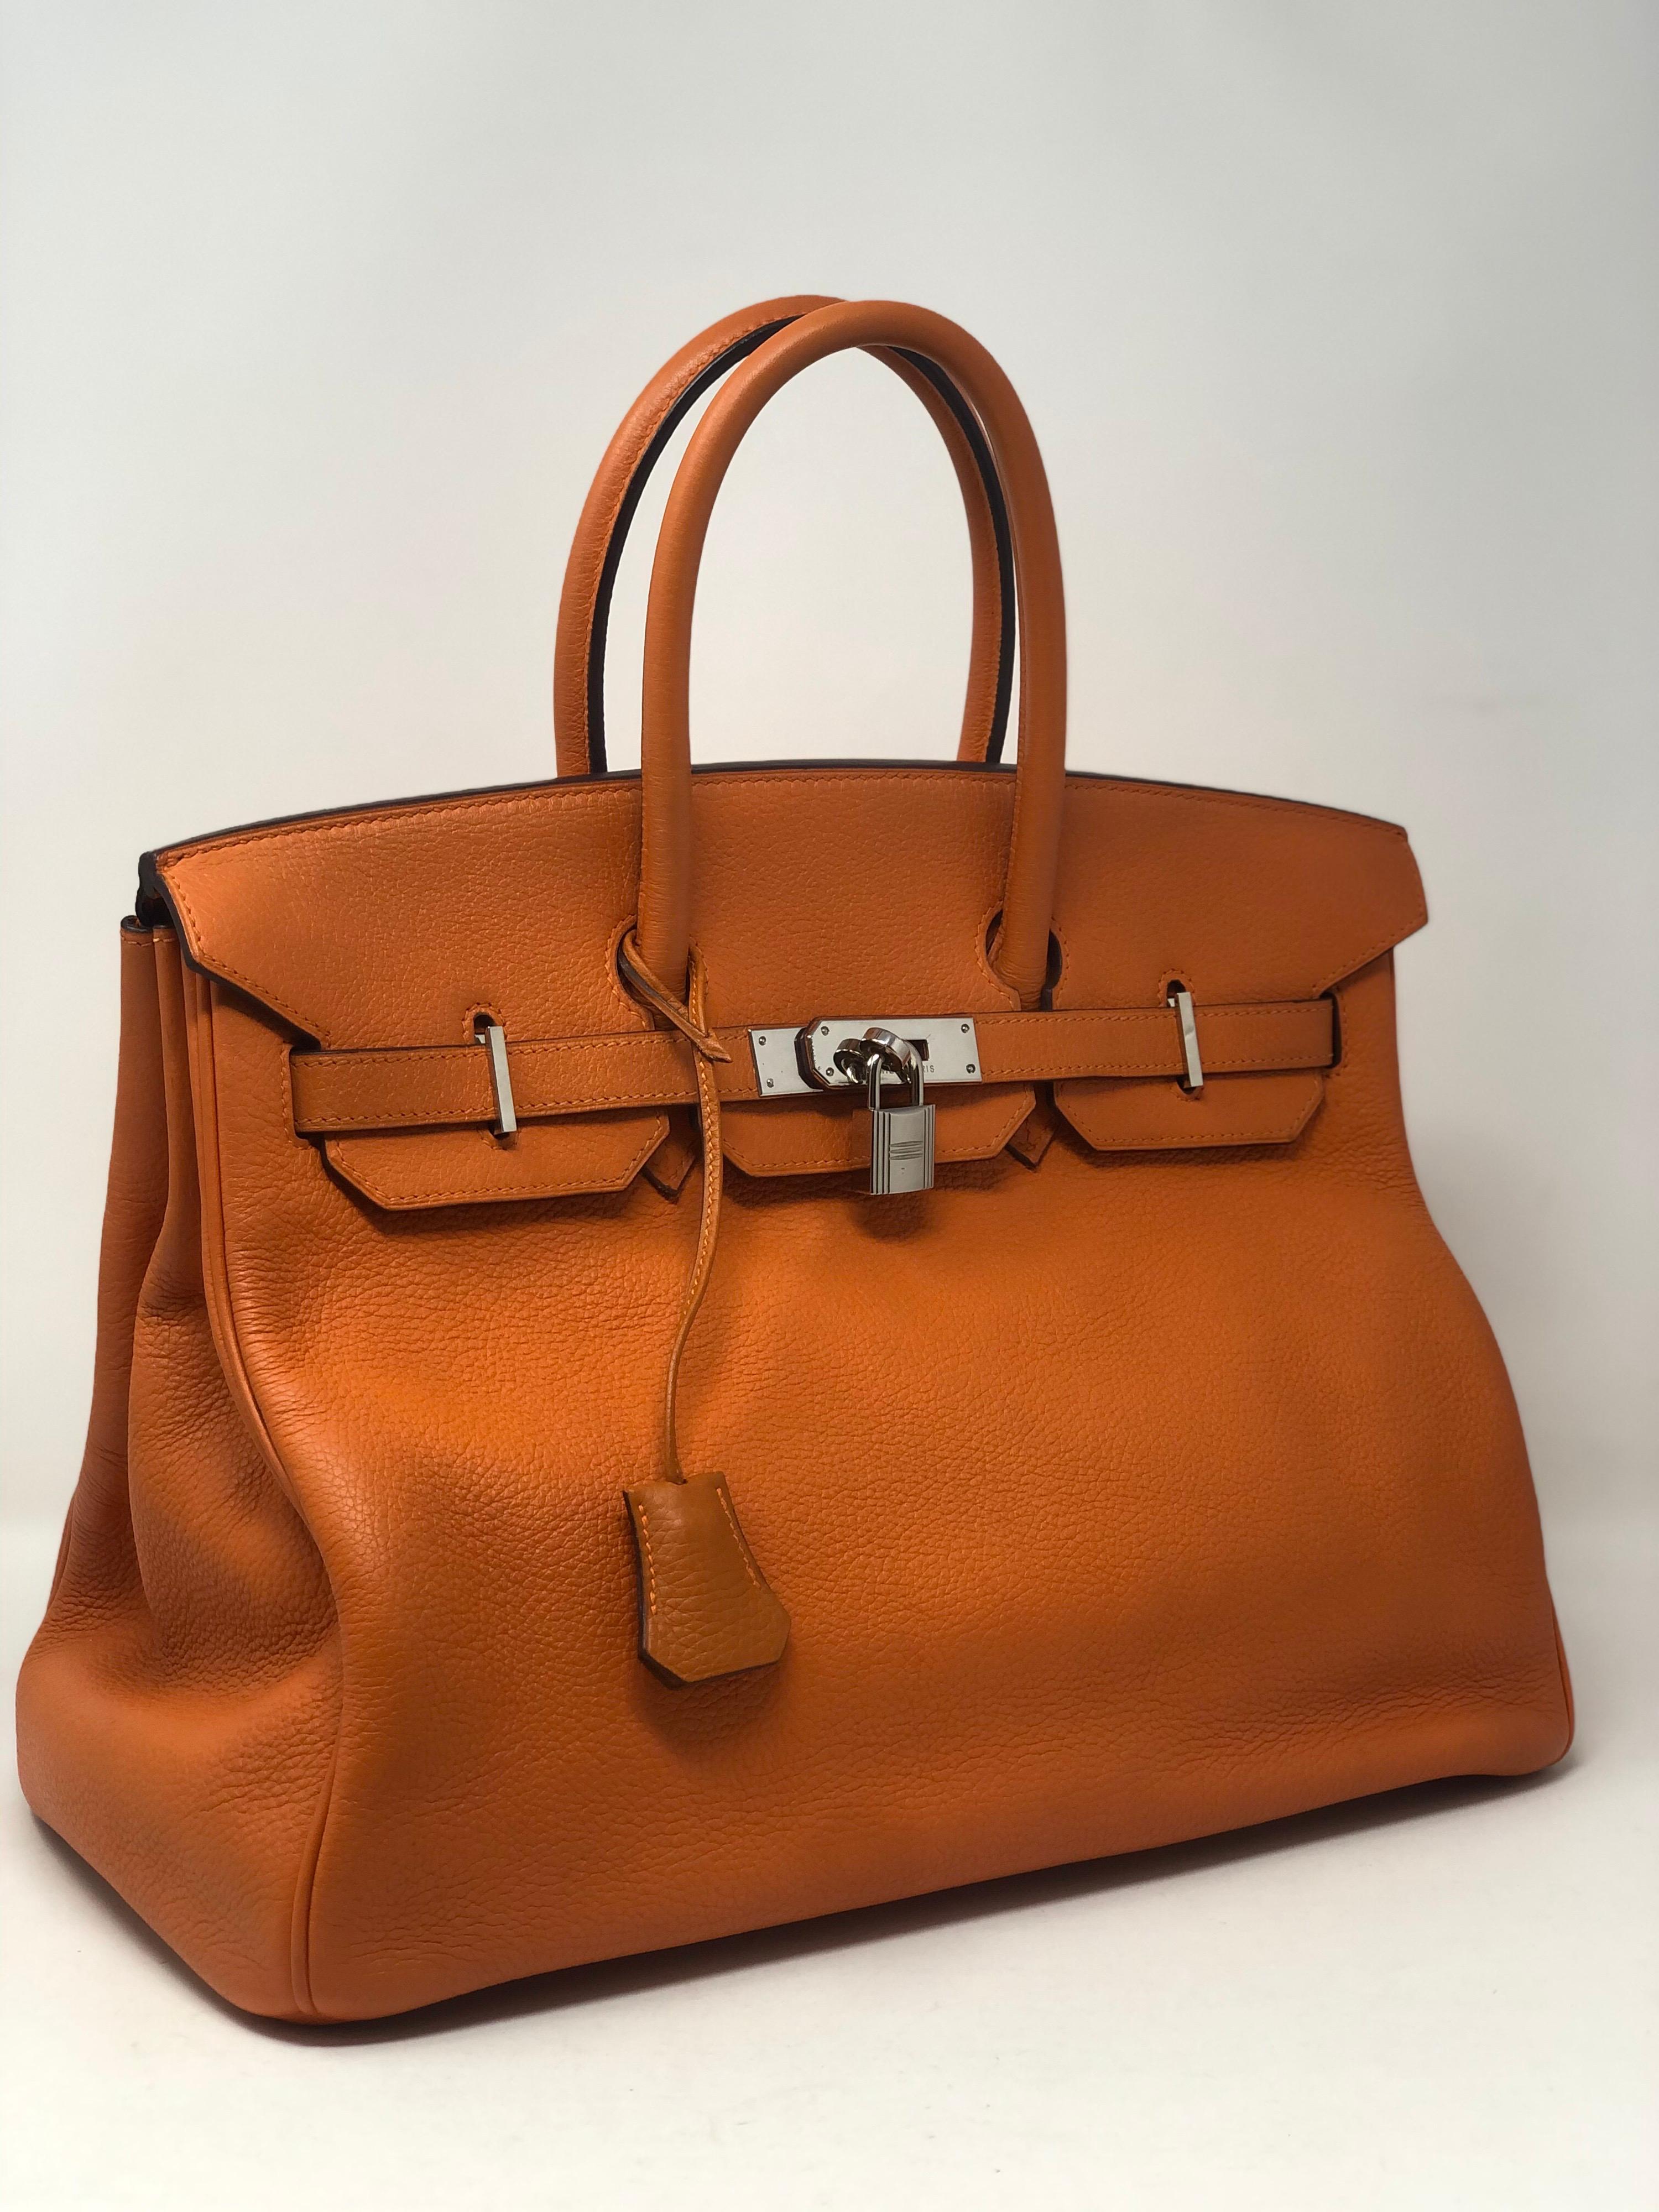 Hermes Birkin 35 Orange Bag. Palladium hardware. Classic orange color in clemence leather. Slight slouch from wear. Includes clochette, lock, keys, and dust cover. Guaranteed authentic. 